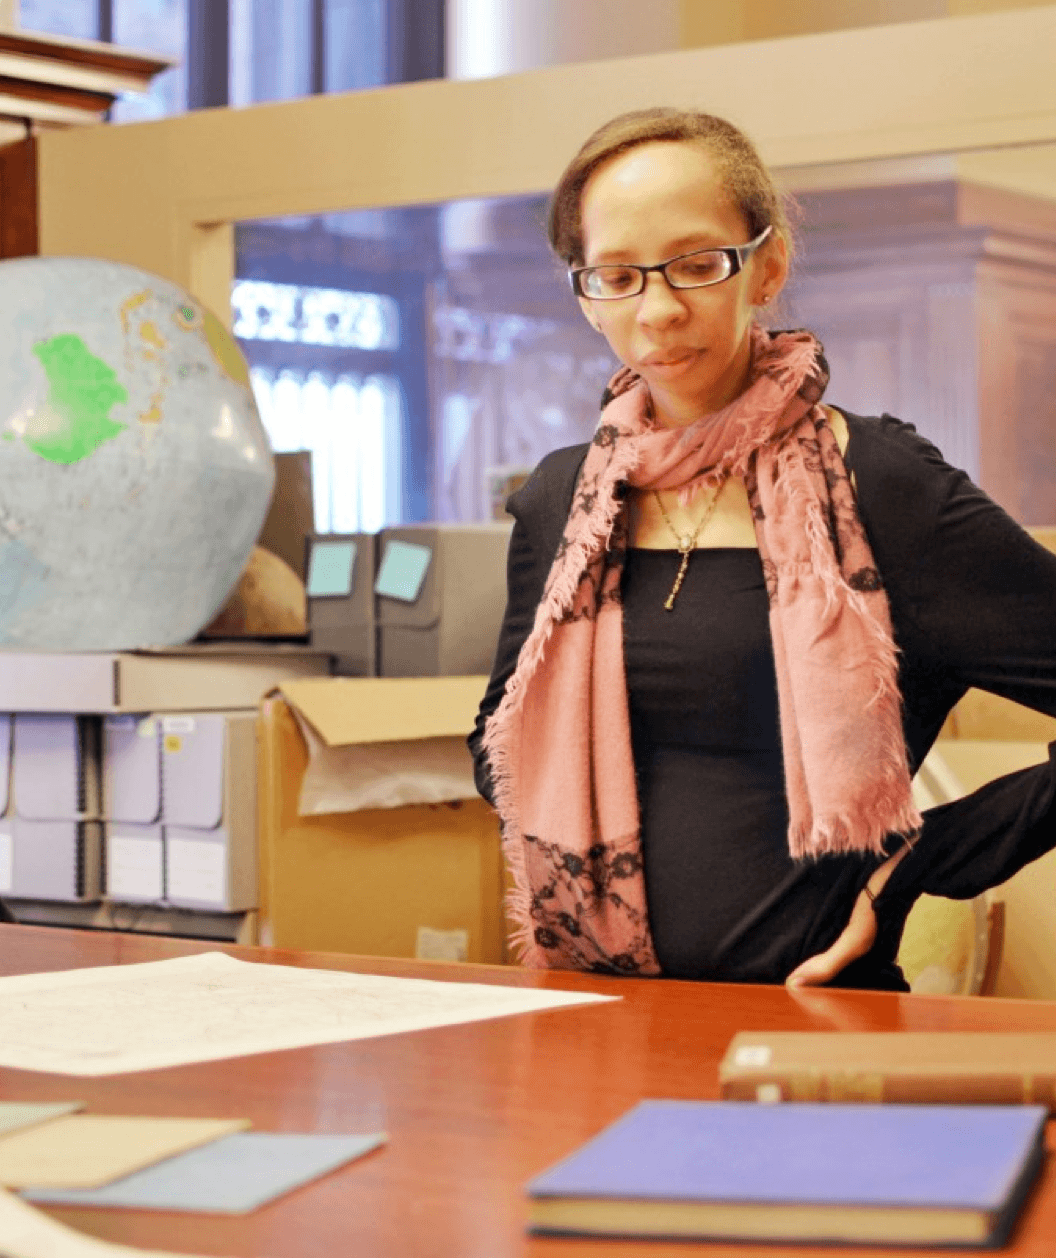 Irene Morrison-Moncure at the NYPL Mapping Division